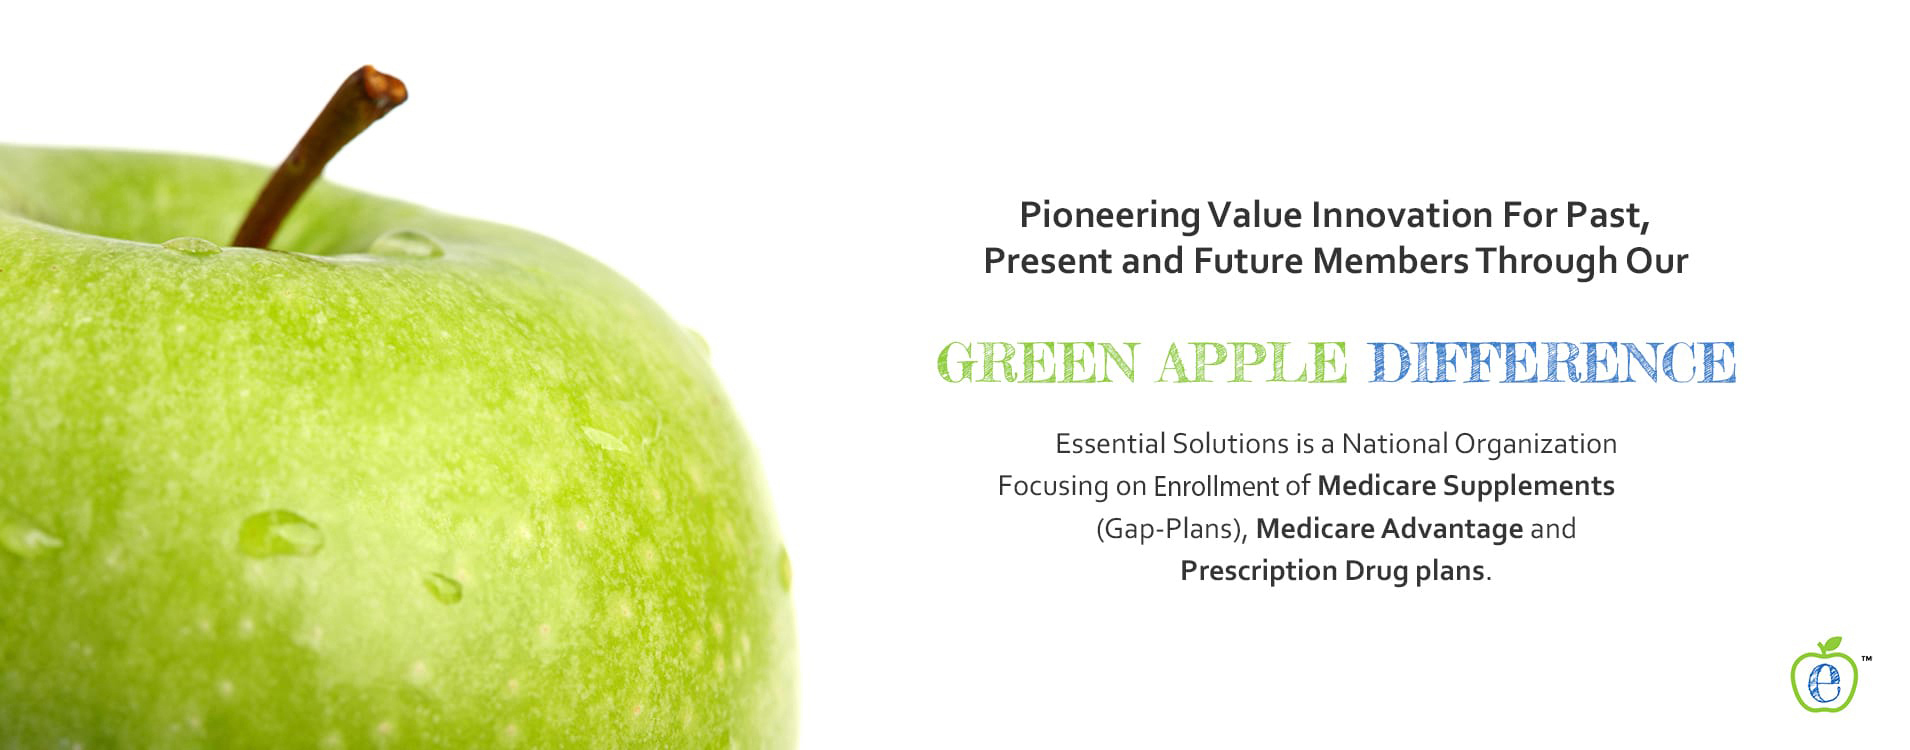 Green Apple Difference